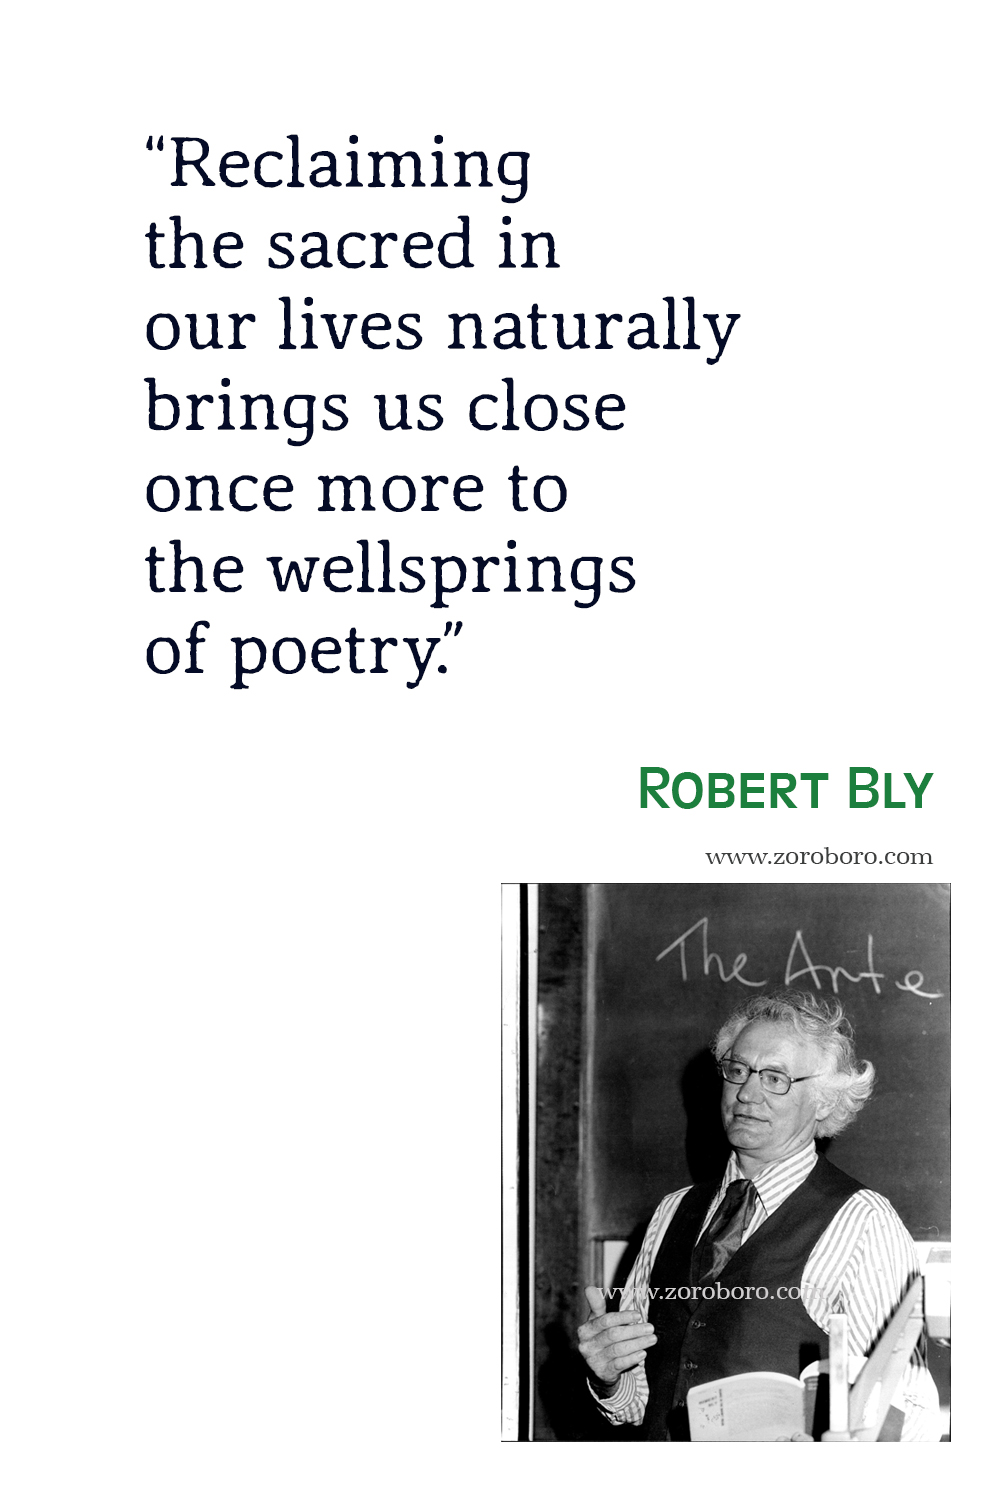 Robert Bly Quotes, Robert Bly Poems, Robert Bly Poetry, Robert Bly Books Quotes, Robert Bly Iron John Quotes, Robert Bly Young .